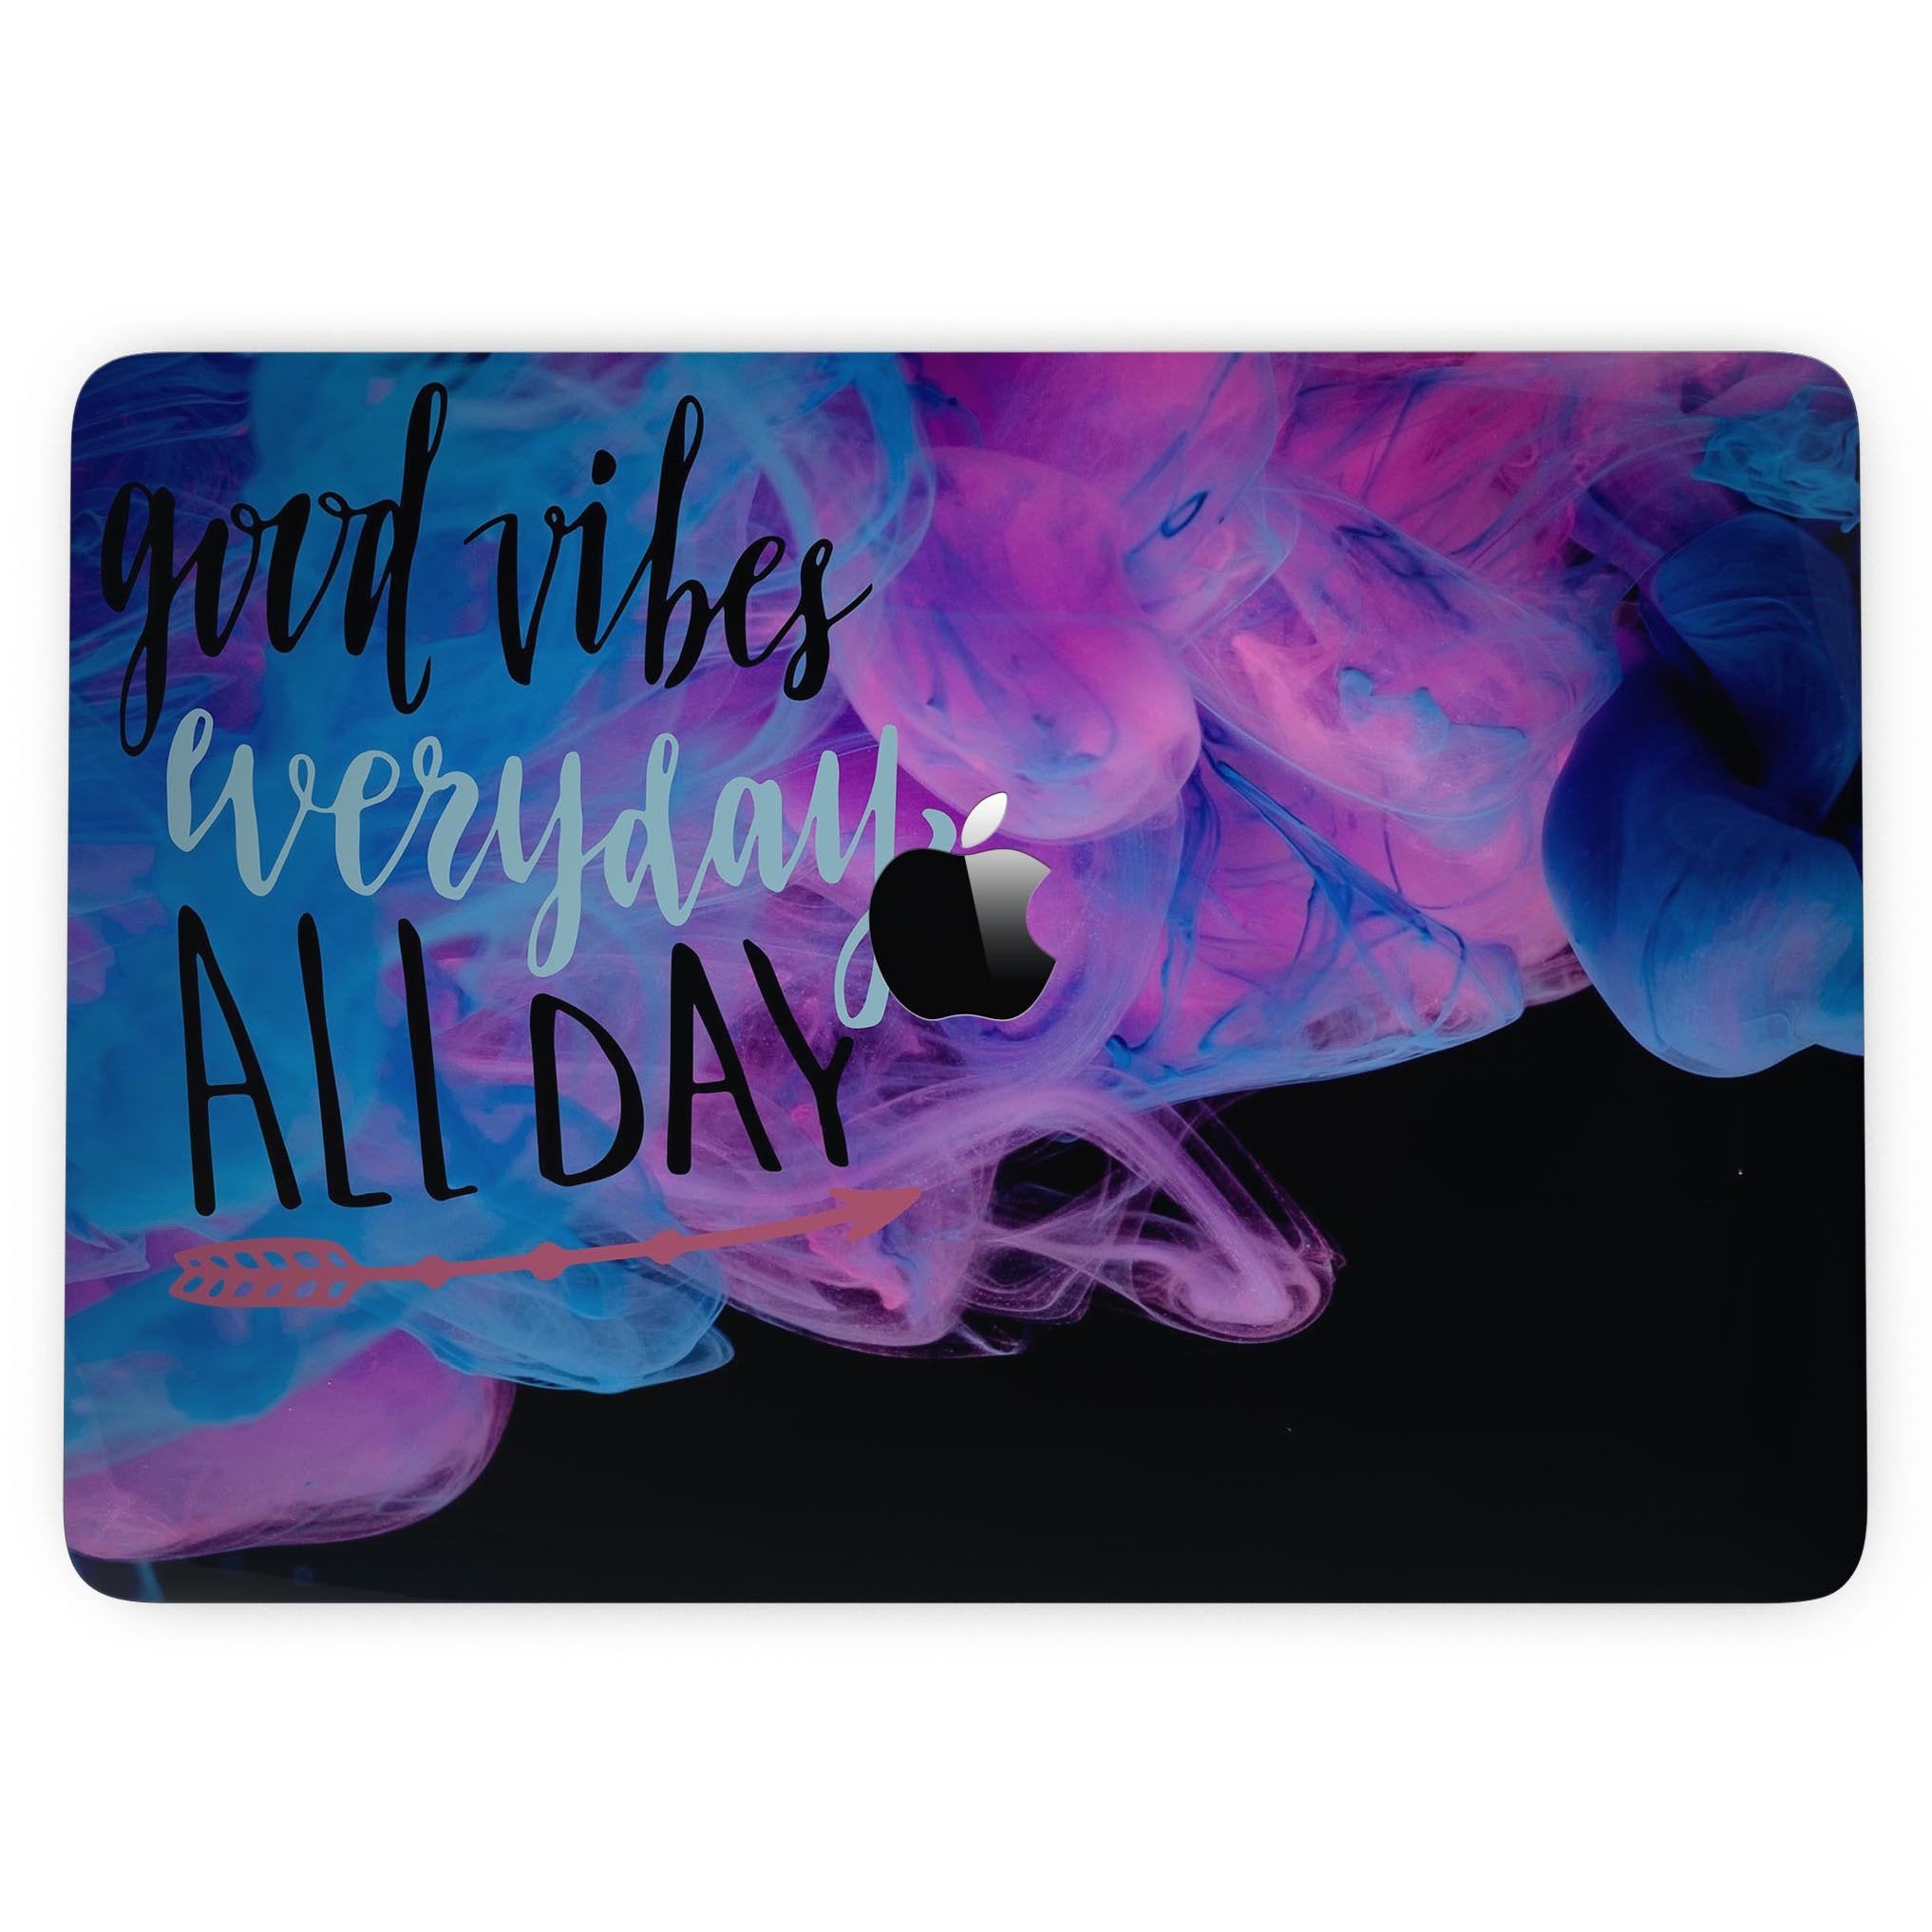 Blue Leto Good Vibes Everyday ALL DAY - 13" MacBook Pro without Touch Bar Skin